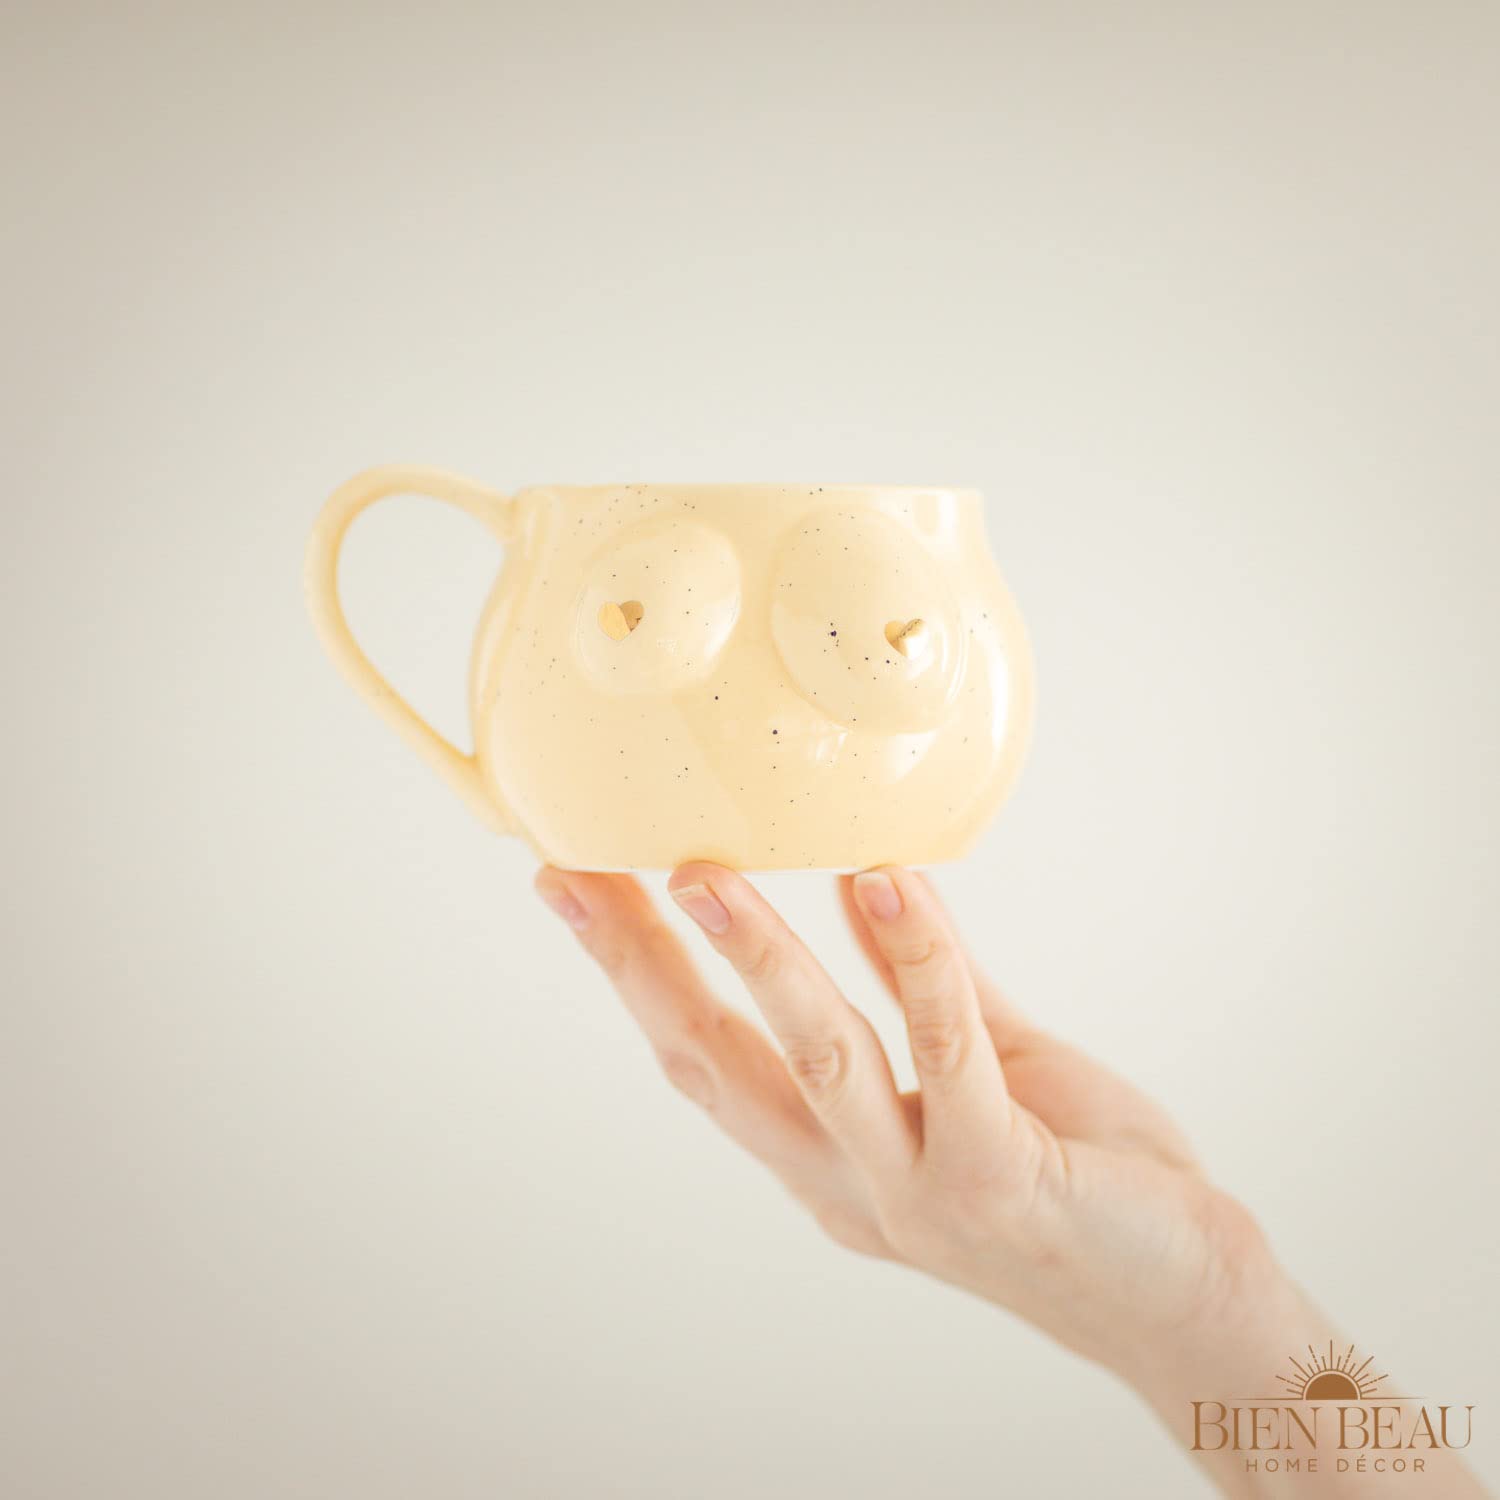 Speckled Ceramic Female Form Mug with golden heart nips, Boob Mug, Funny Large Coffee Boob Cup, Female Body Vase, Boob Planter, Boob Gifts Tea Cup, Feminist Gift, Eclectic Decor, 300ML Light color